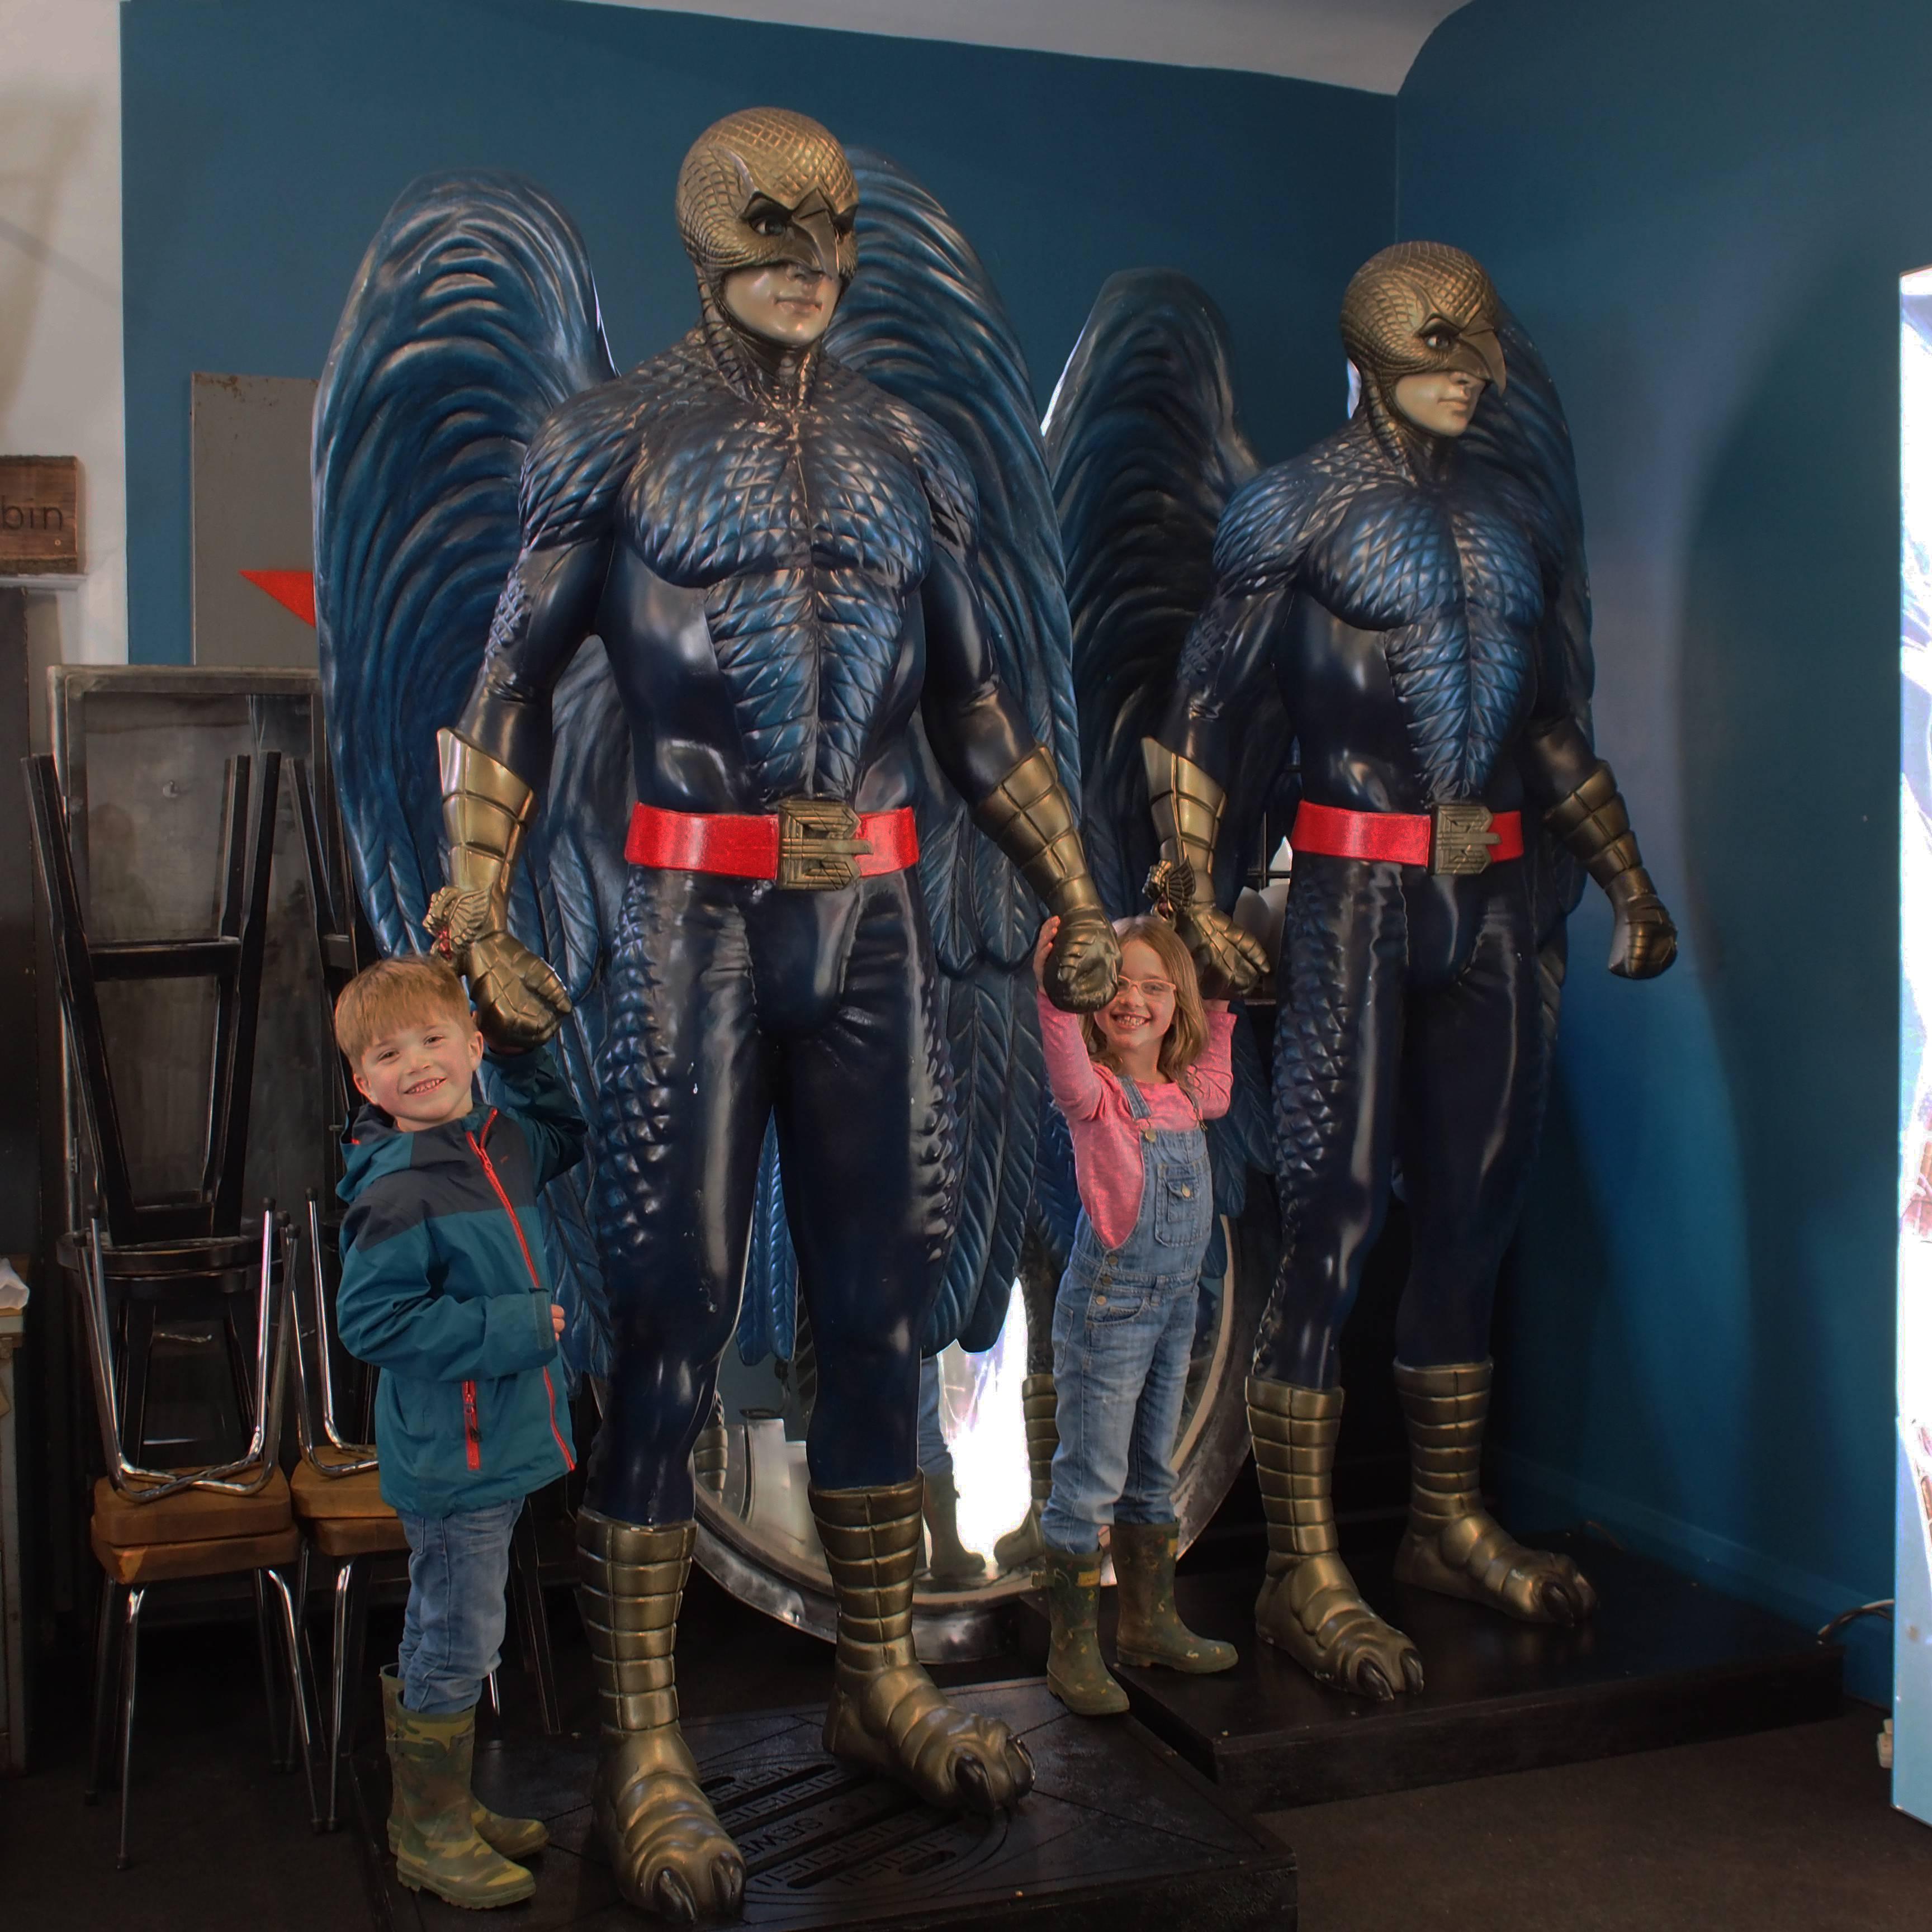 At 2.5 metres tall and from the premiere of the Birdman movie, starring Michael Keaton, this pair of larger-than-life figures are imposing and are certain to be the talking point wherever placed. Perfect for a themed pub, diner, restaurant, games